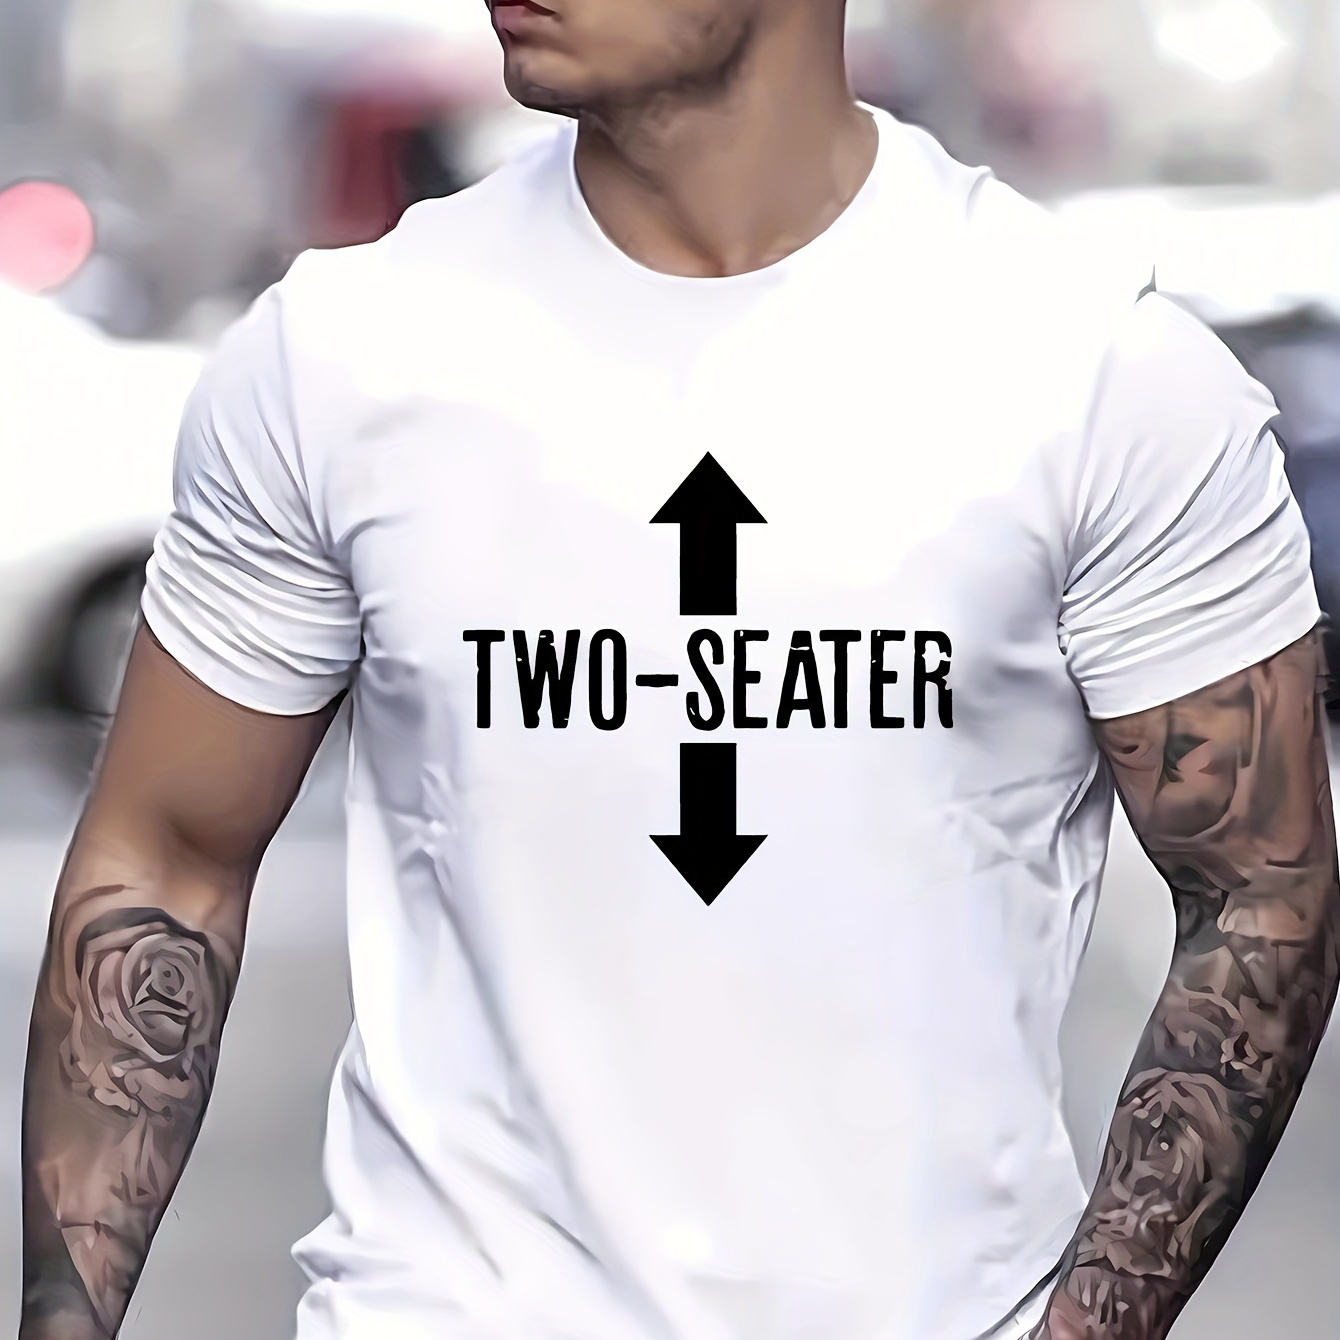 

Two-seater Print, Men's Round Crew Neck Short Sleeve, Simple Style Tee Fashion Regular Fit T-shirt, Casual Comfy Top For Spring Summer Holiday Leisure Vacation Men's Clothing As Gift